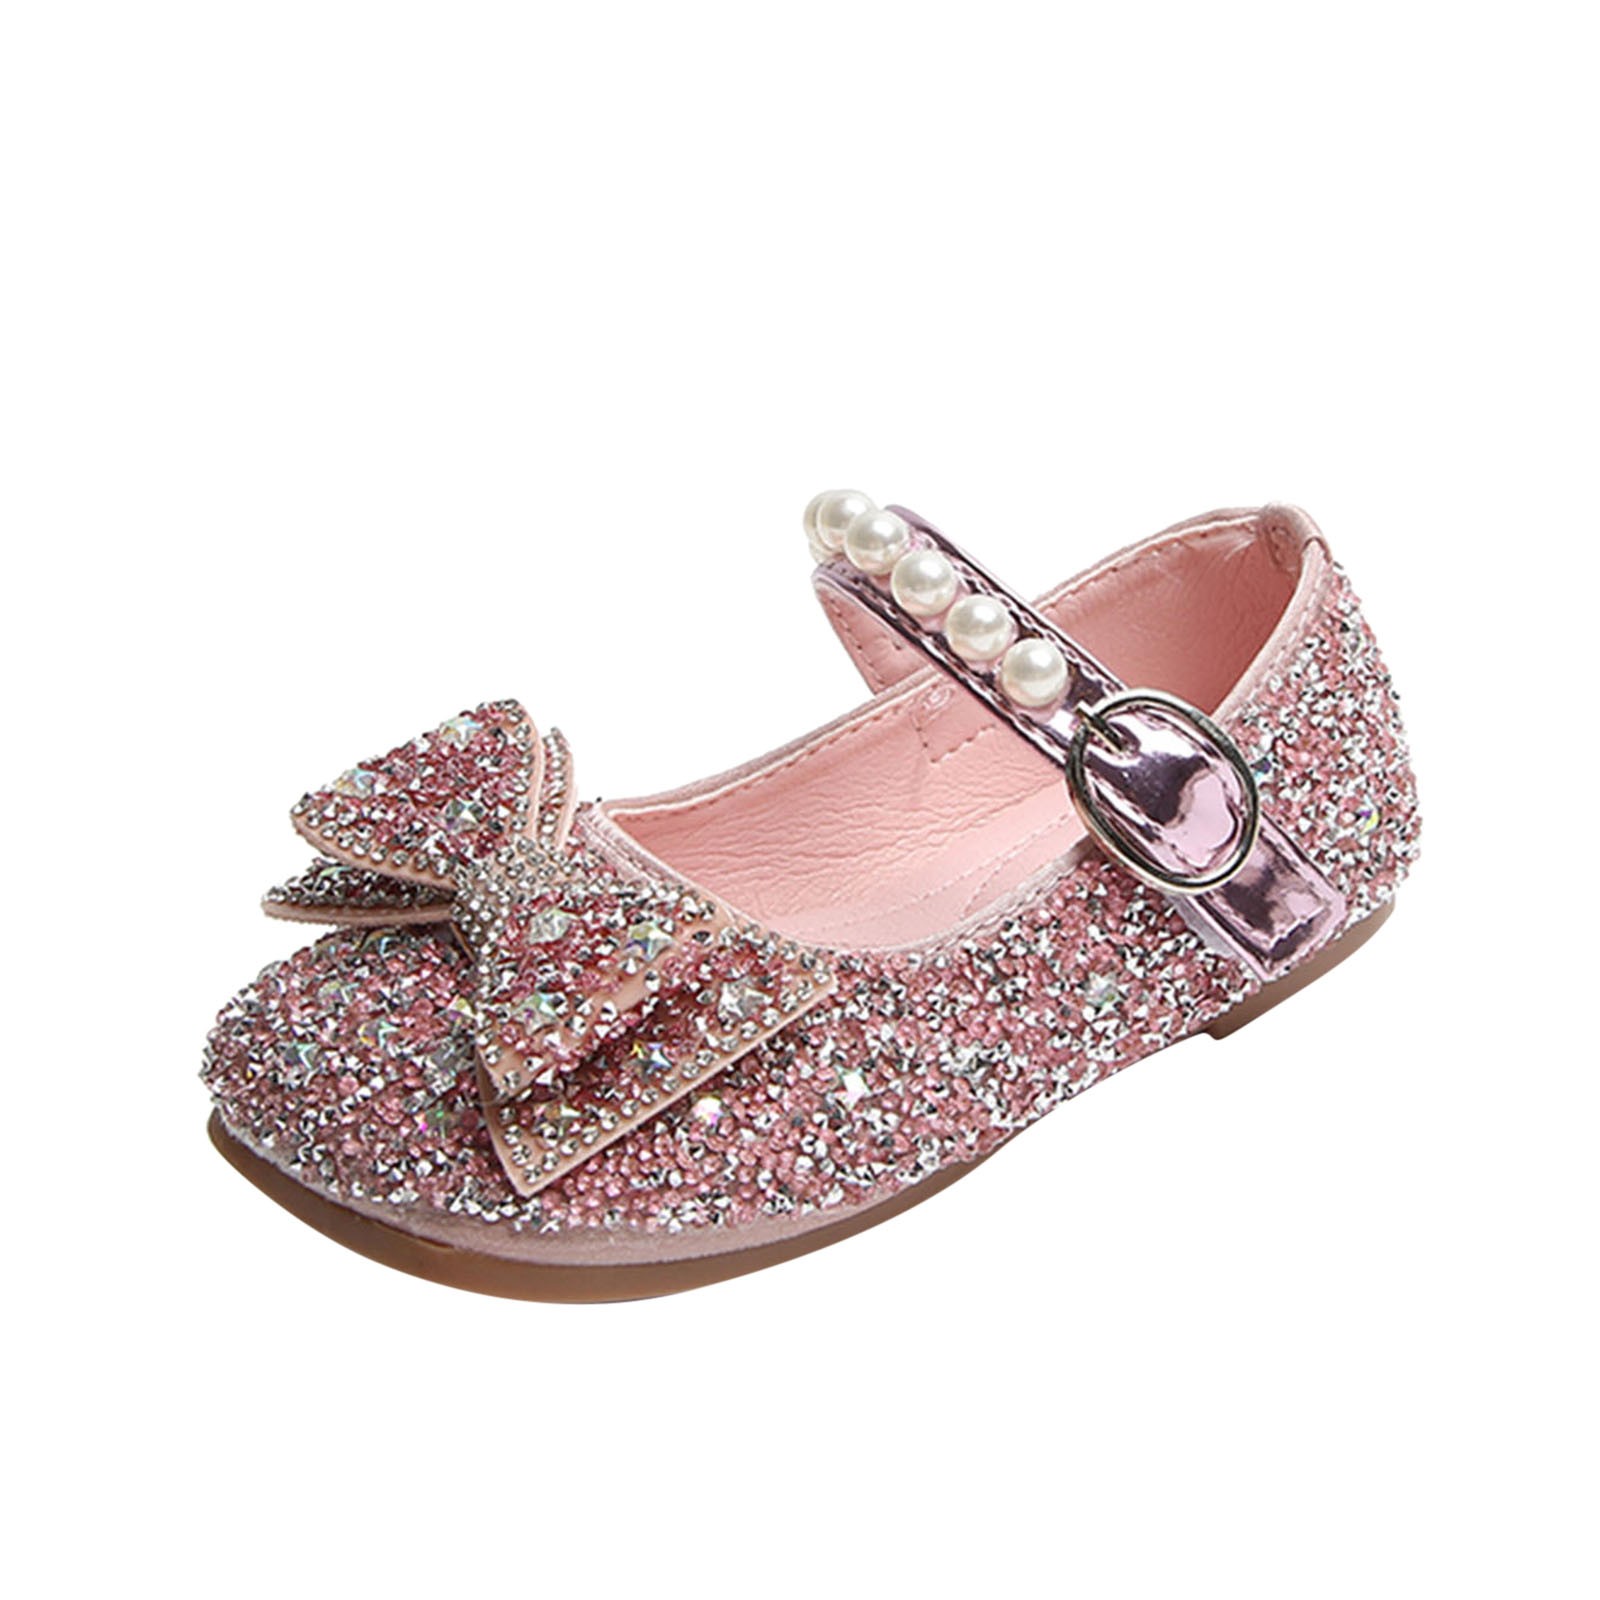 Jdefeg Girls Shoes Size 13 Fashion Autumn Girls Casual Shoes Rhinestone Sequin Bow Buckle Dress Shoes Dance Shoes Girl 6 Toddler Girl Boots Pu Pink 21 - image 1 of 5